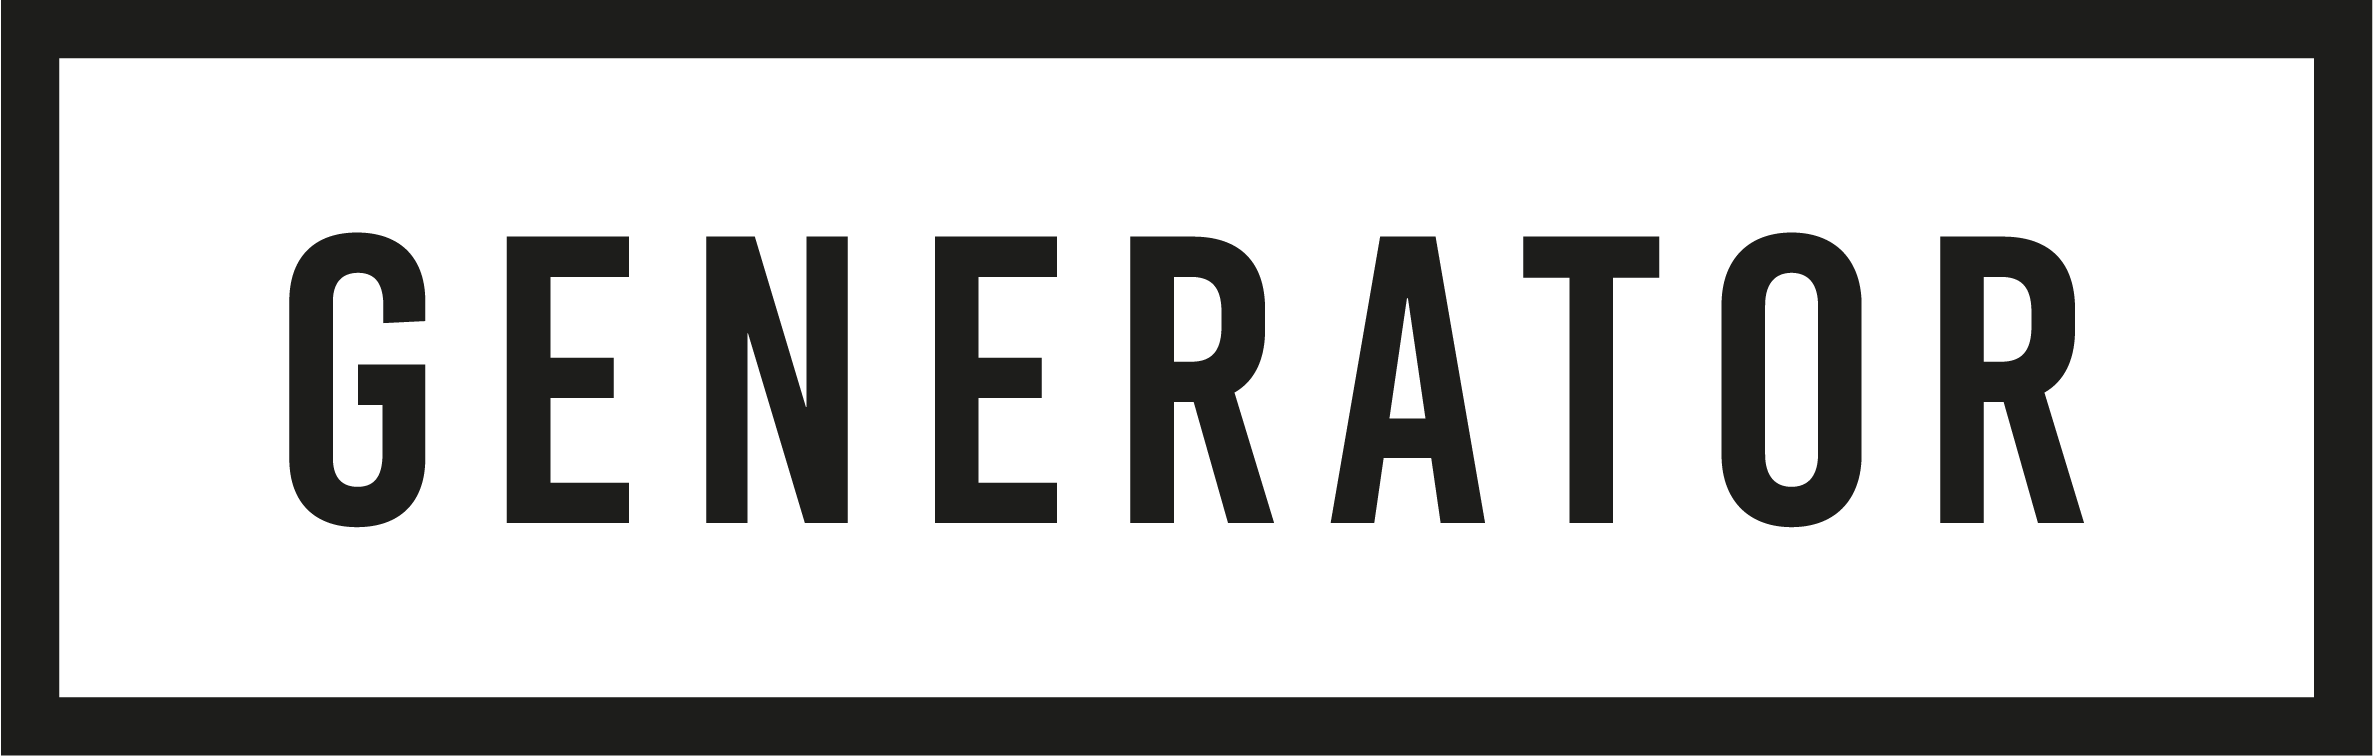 logo for Generator North East